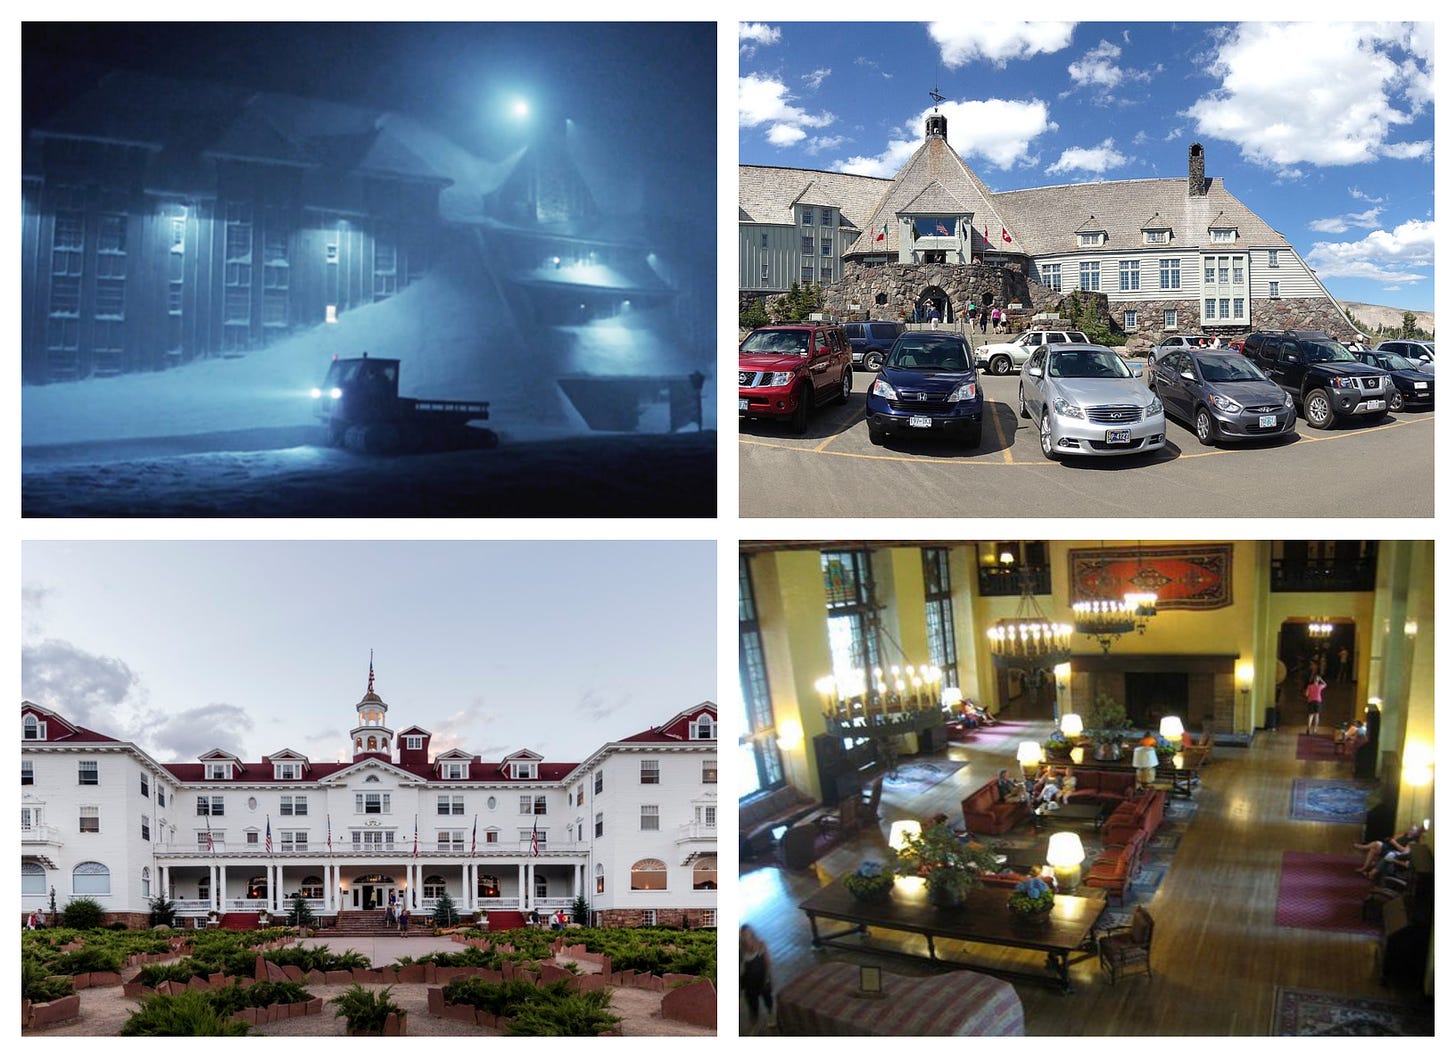 One movie, four hotels: the Overlook Hotel (fictional), the Timberline Hotel (in Oregon), the Stanley Hotel (in Colorado), and the Ahwahnee Hotel (in California).